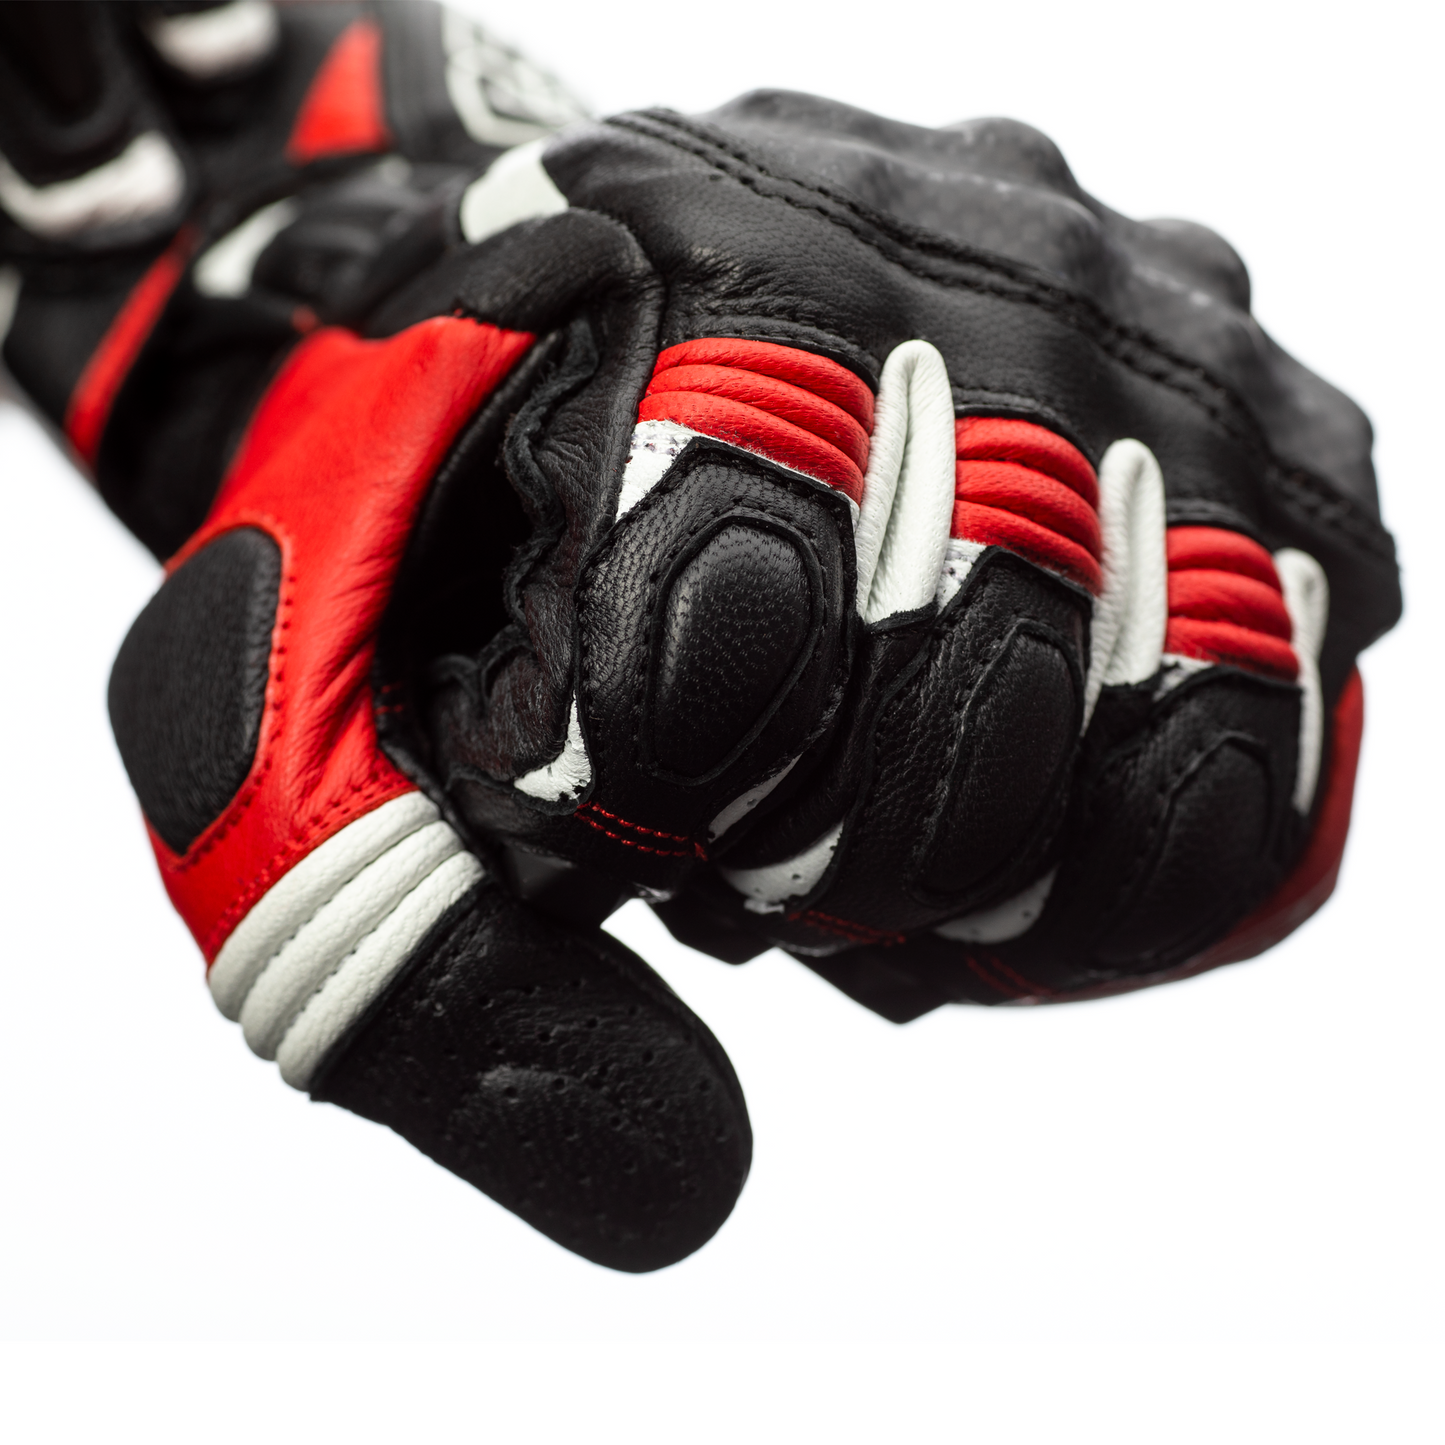 RST Axis Leather Riding Gloves - CE APPROVED - Red